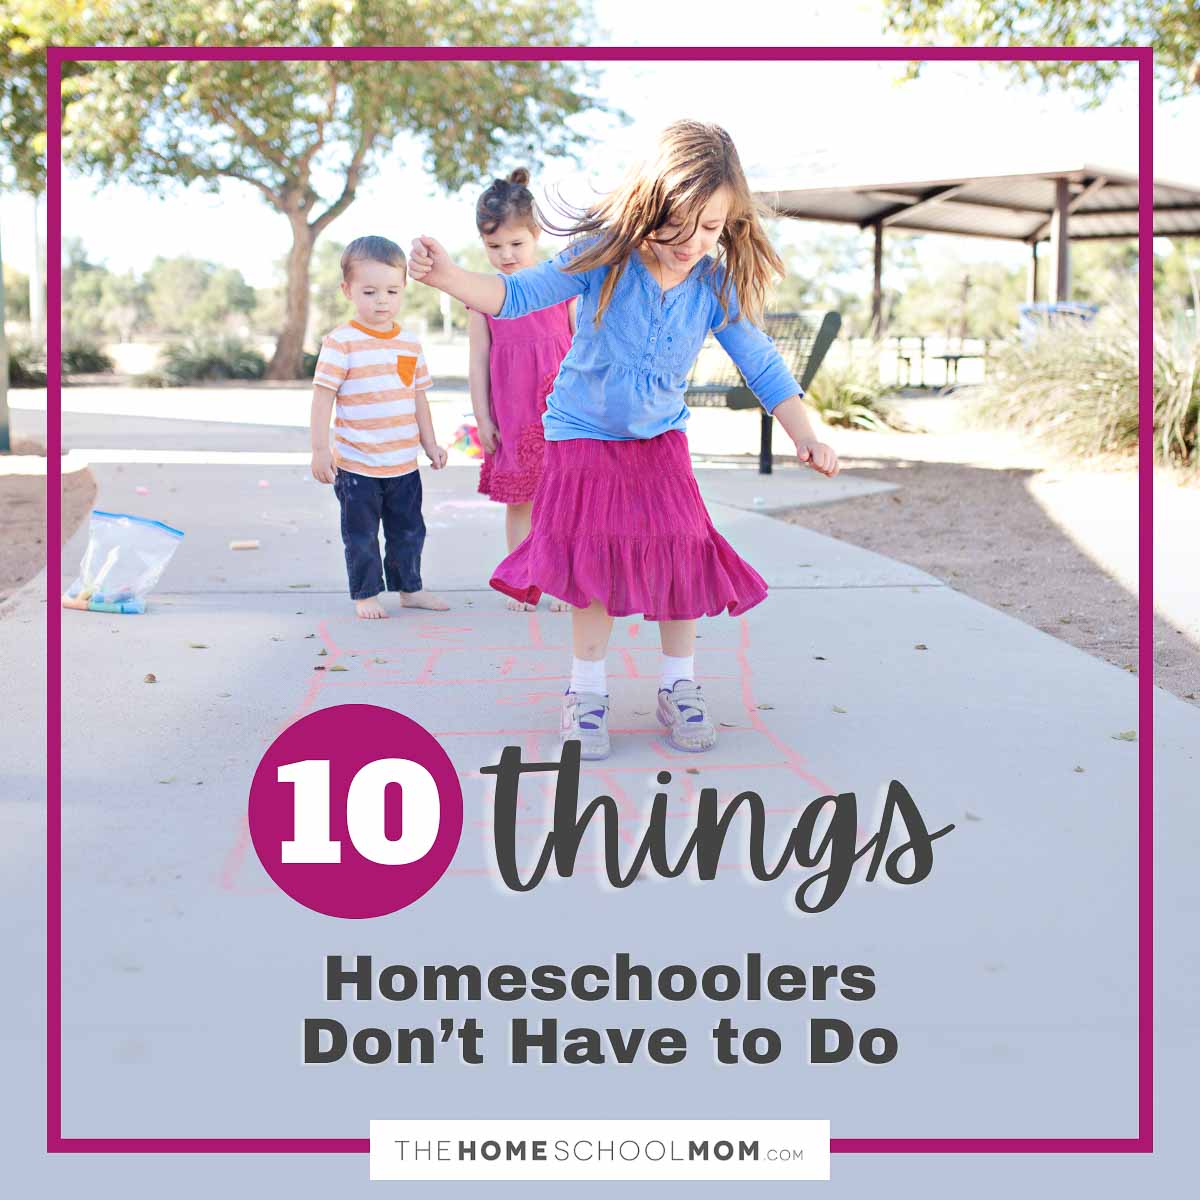 Ten Things Homeschoolers Don’t Have To Do.